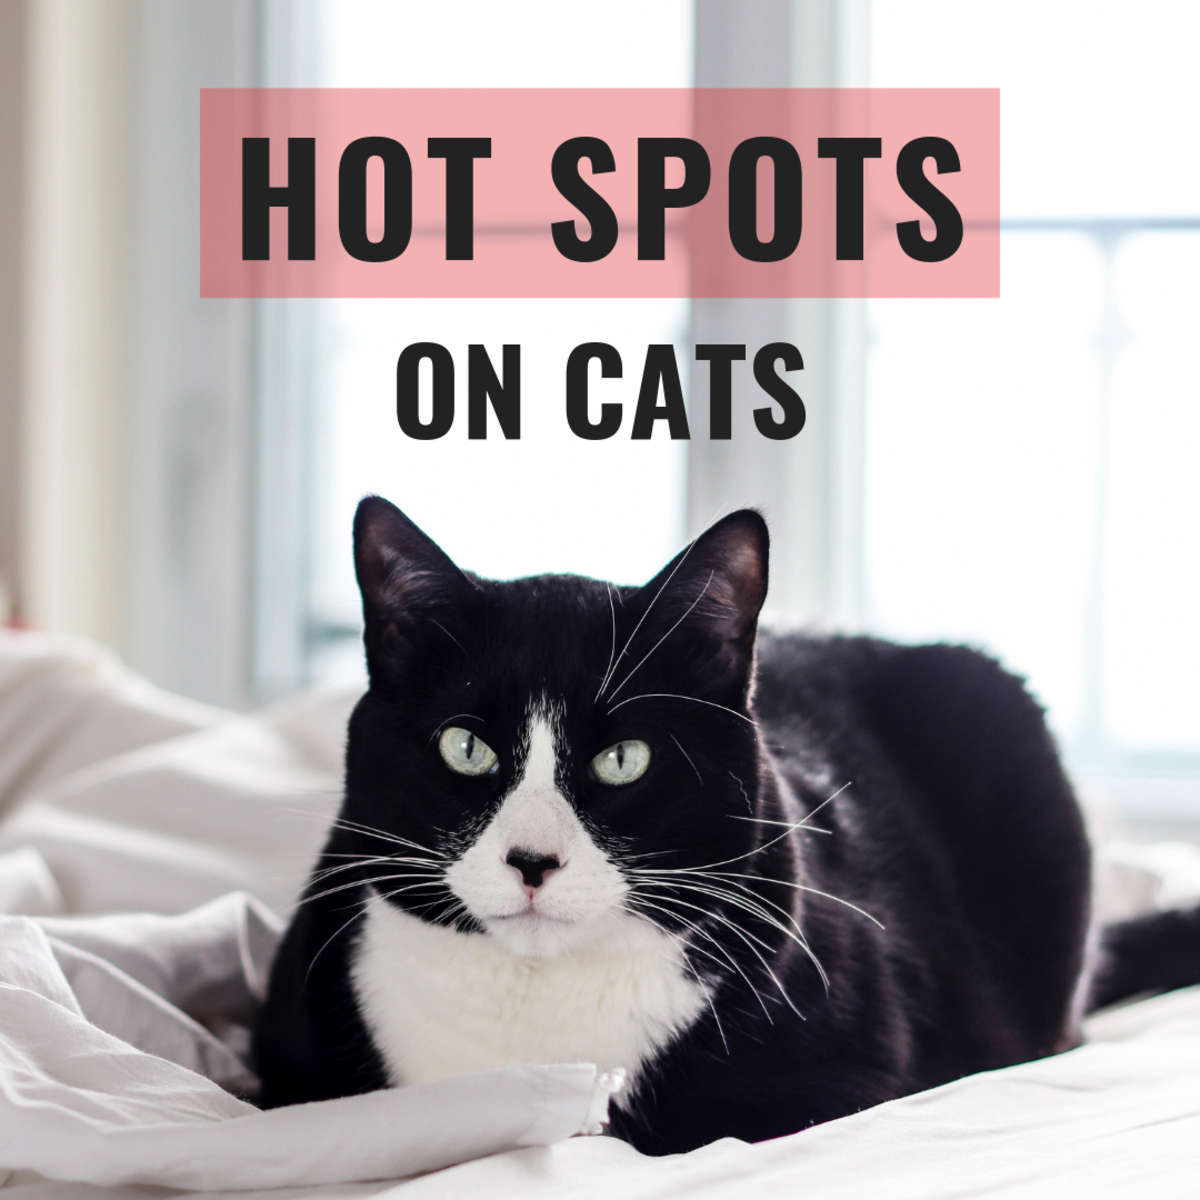 How to Get Rid of Hot Spots on Cats